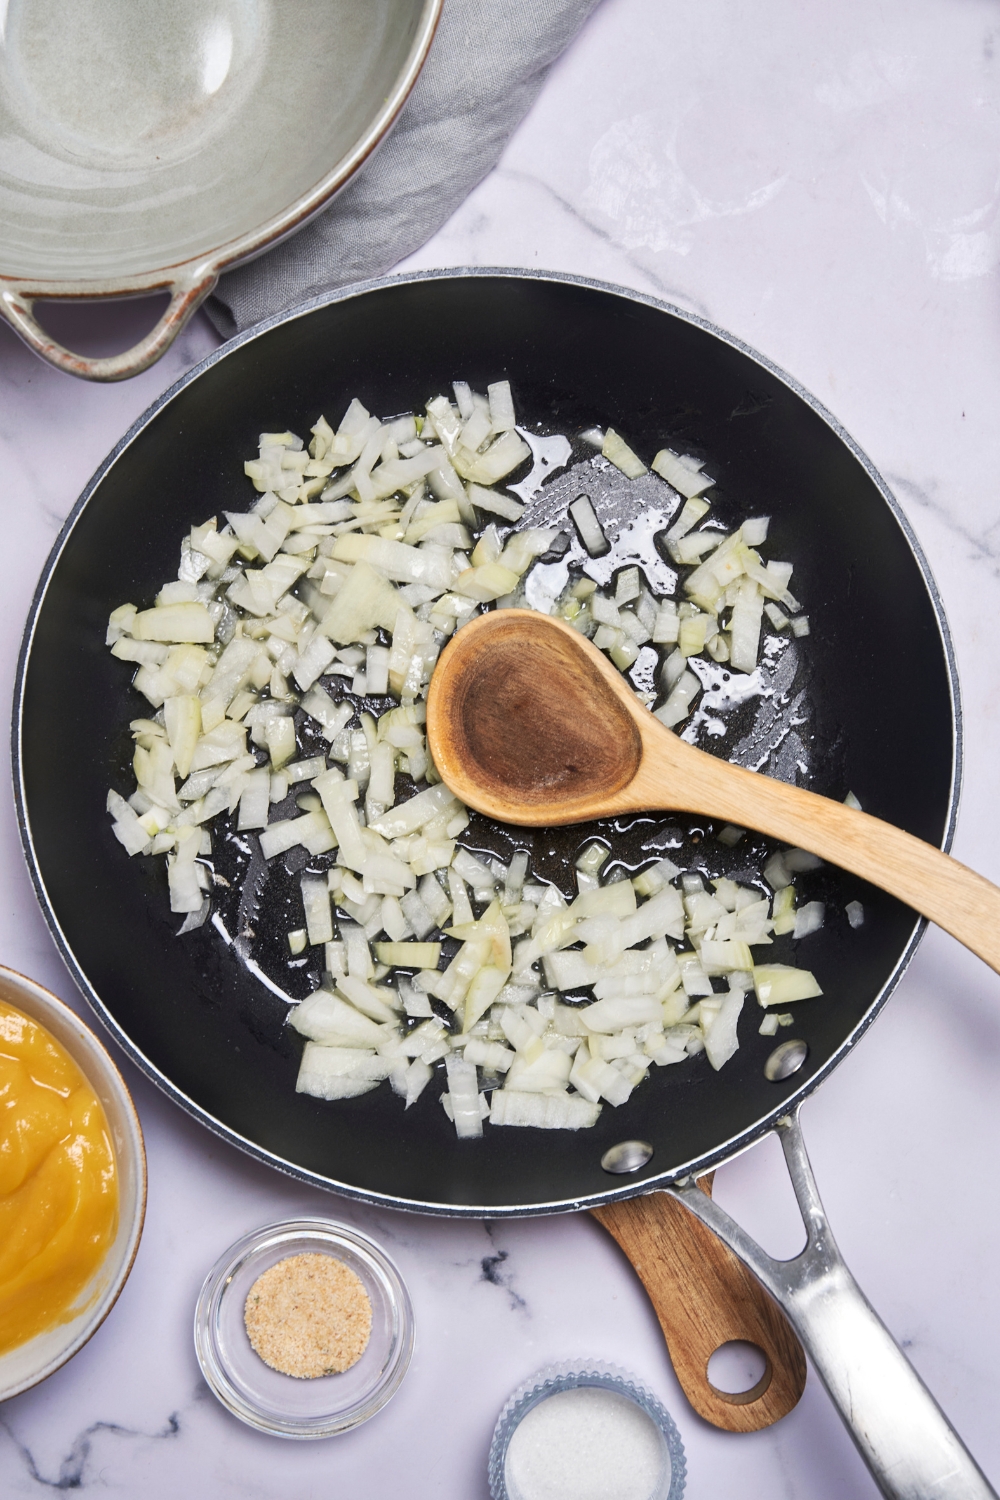 A black frying pan with diced white onions in it. A wooden spoon rests in the pan.